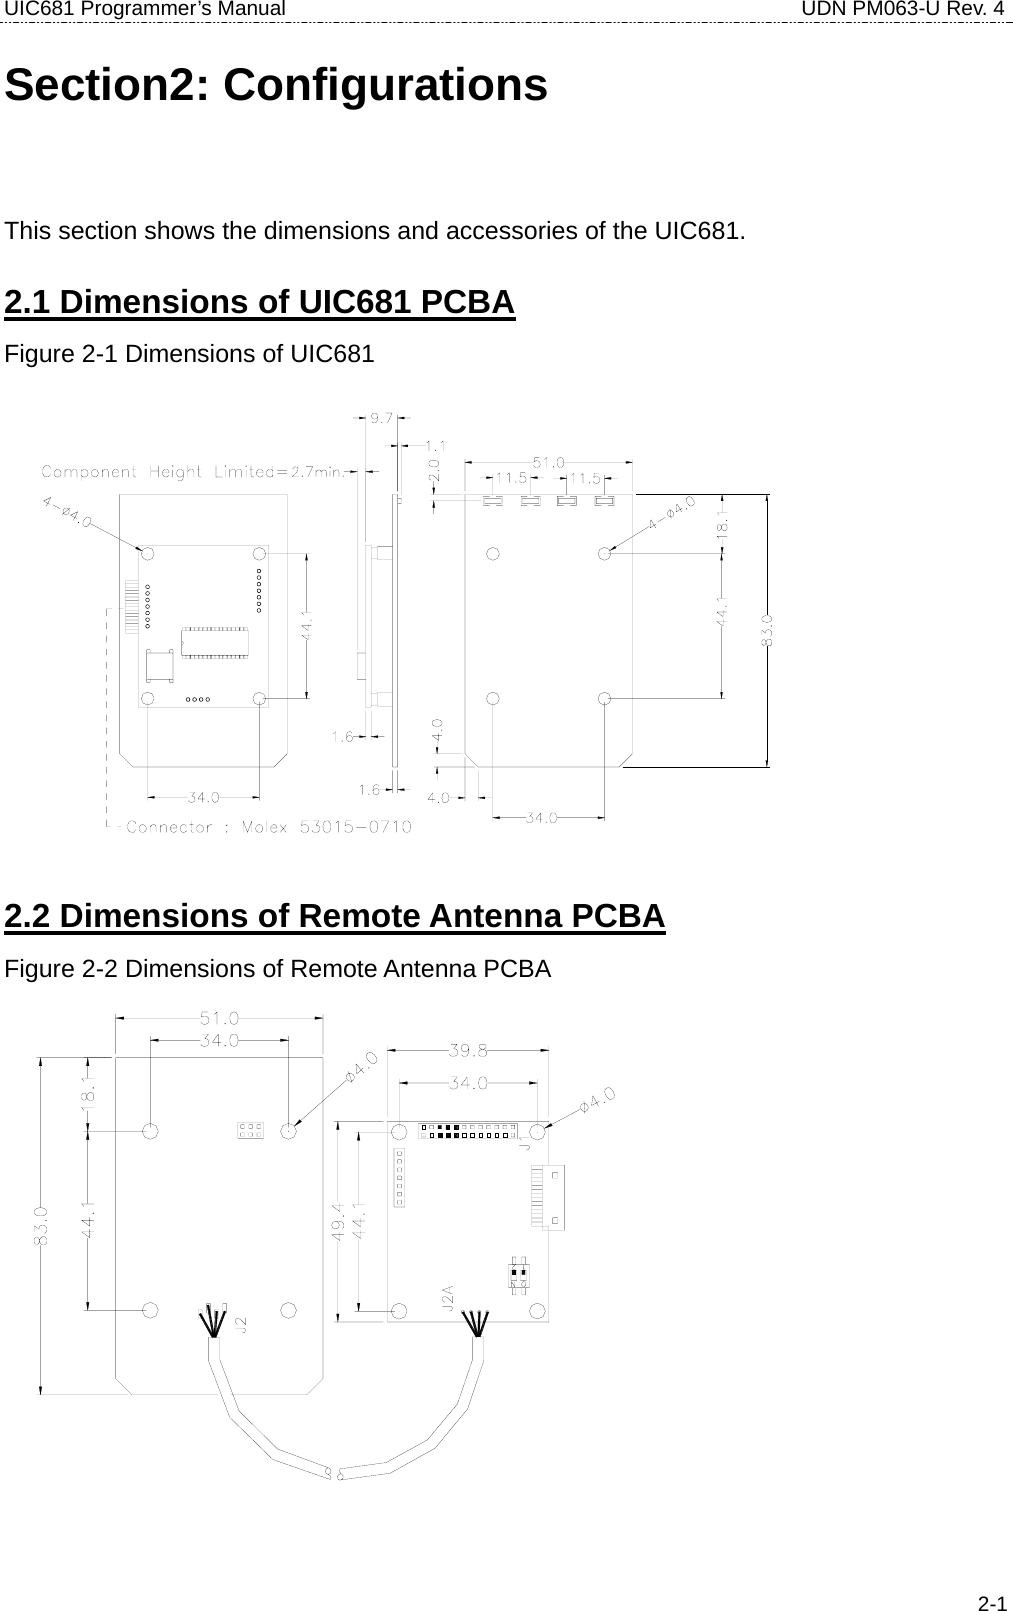 UIC681 Programmer’s Manual                                     UDN PM063-U Rev. 4  2-1Section2: Configurations This section shows the dimensions and accessories of the UIC681. 2.1 Dimensions of UIC681 PCBA Figure 2-1 Dimensions of UIC681  2.2 Dimensions of Remote Antenna PCBA Figure 2-2 Dimensions of Remote Antenna PCBA  